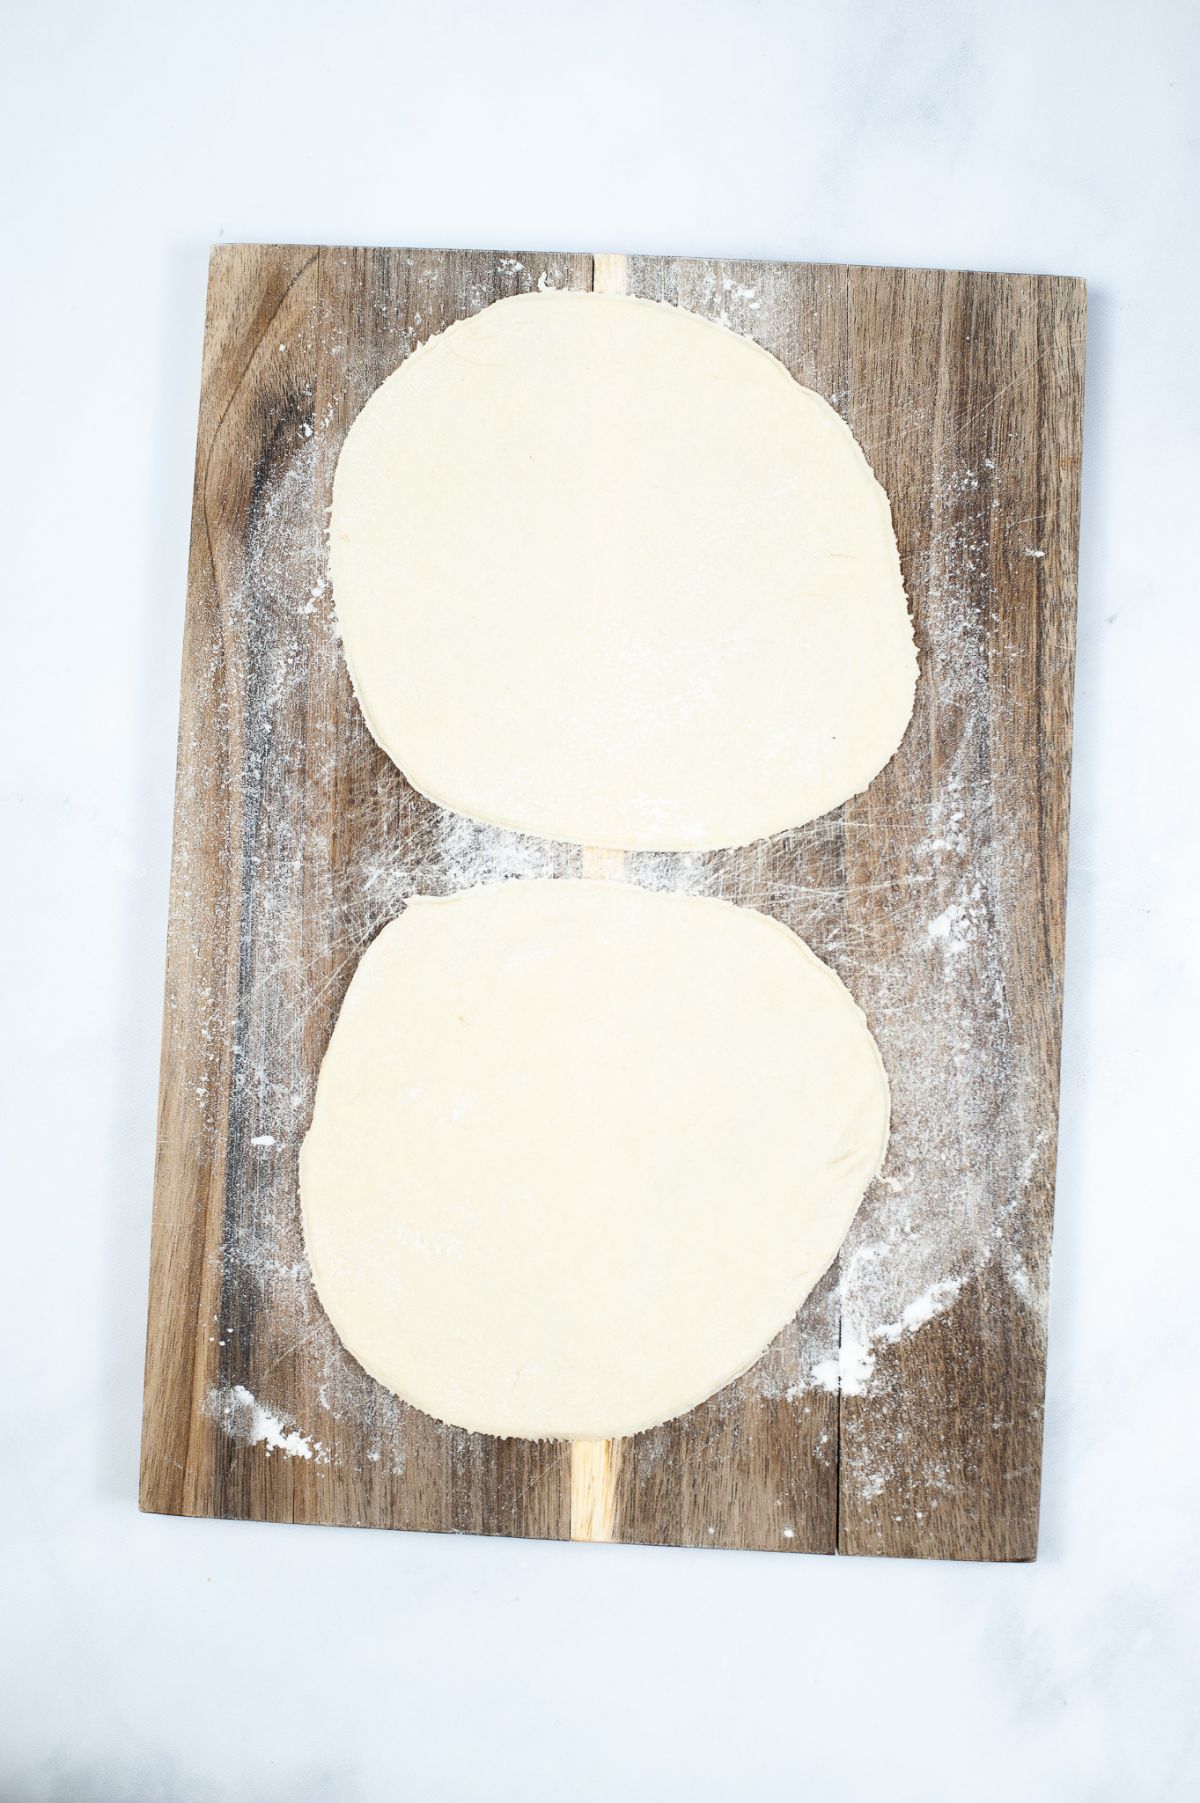 2 pieces of flattened dough, cut out into circles on a wooden board.